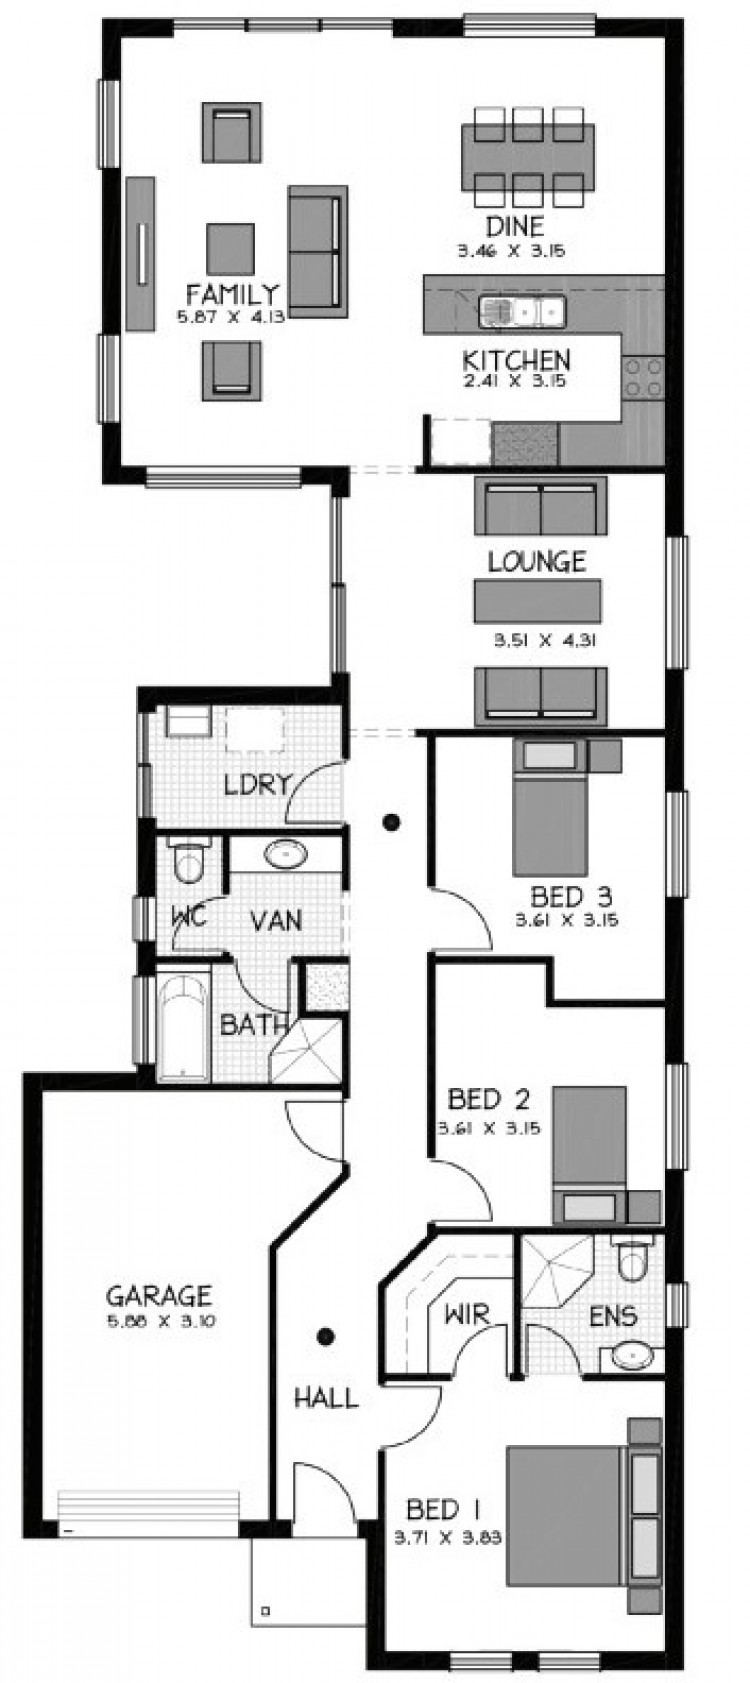 Ashbourne Select Floorplan Couldnt locate in Plan Library